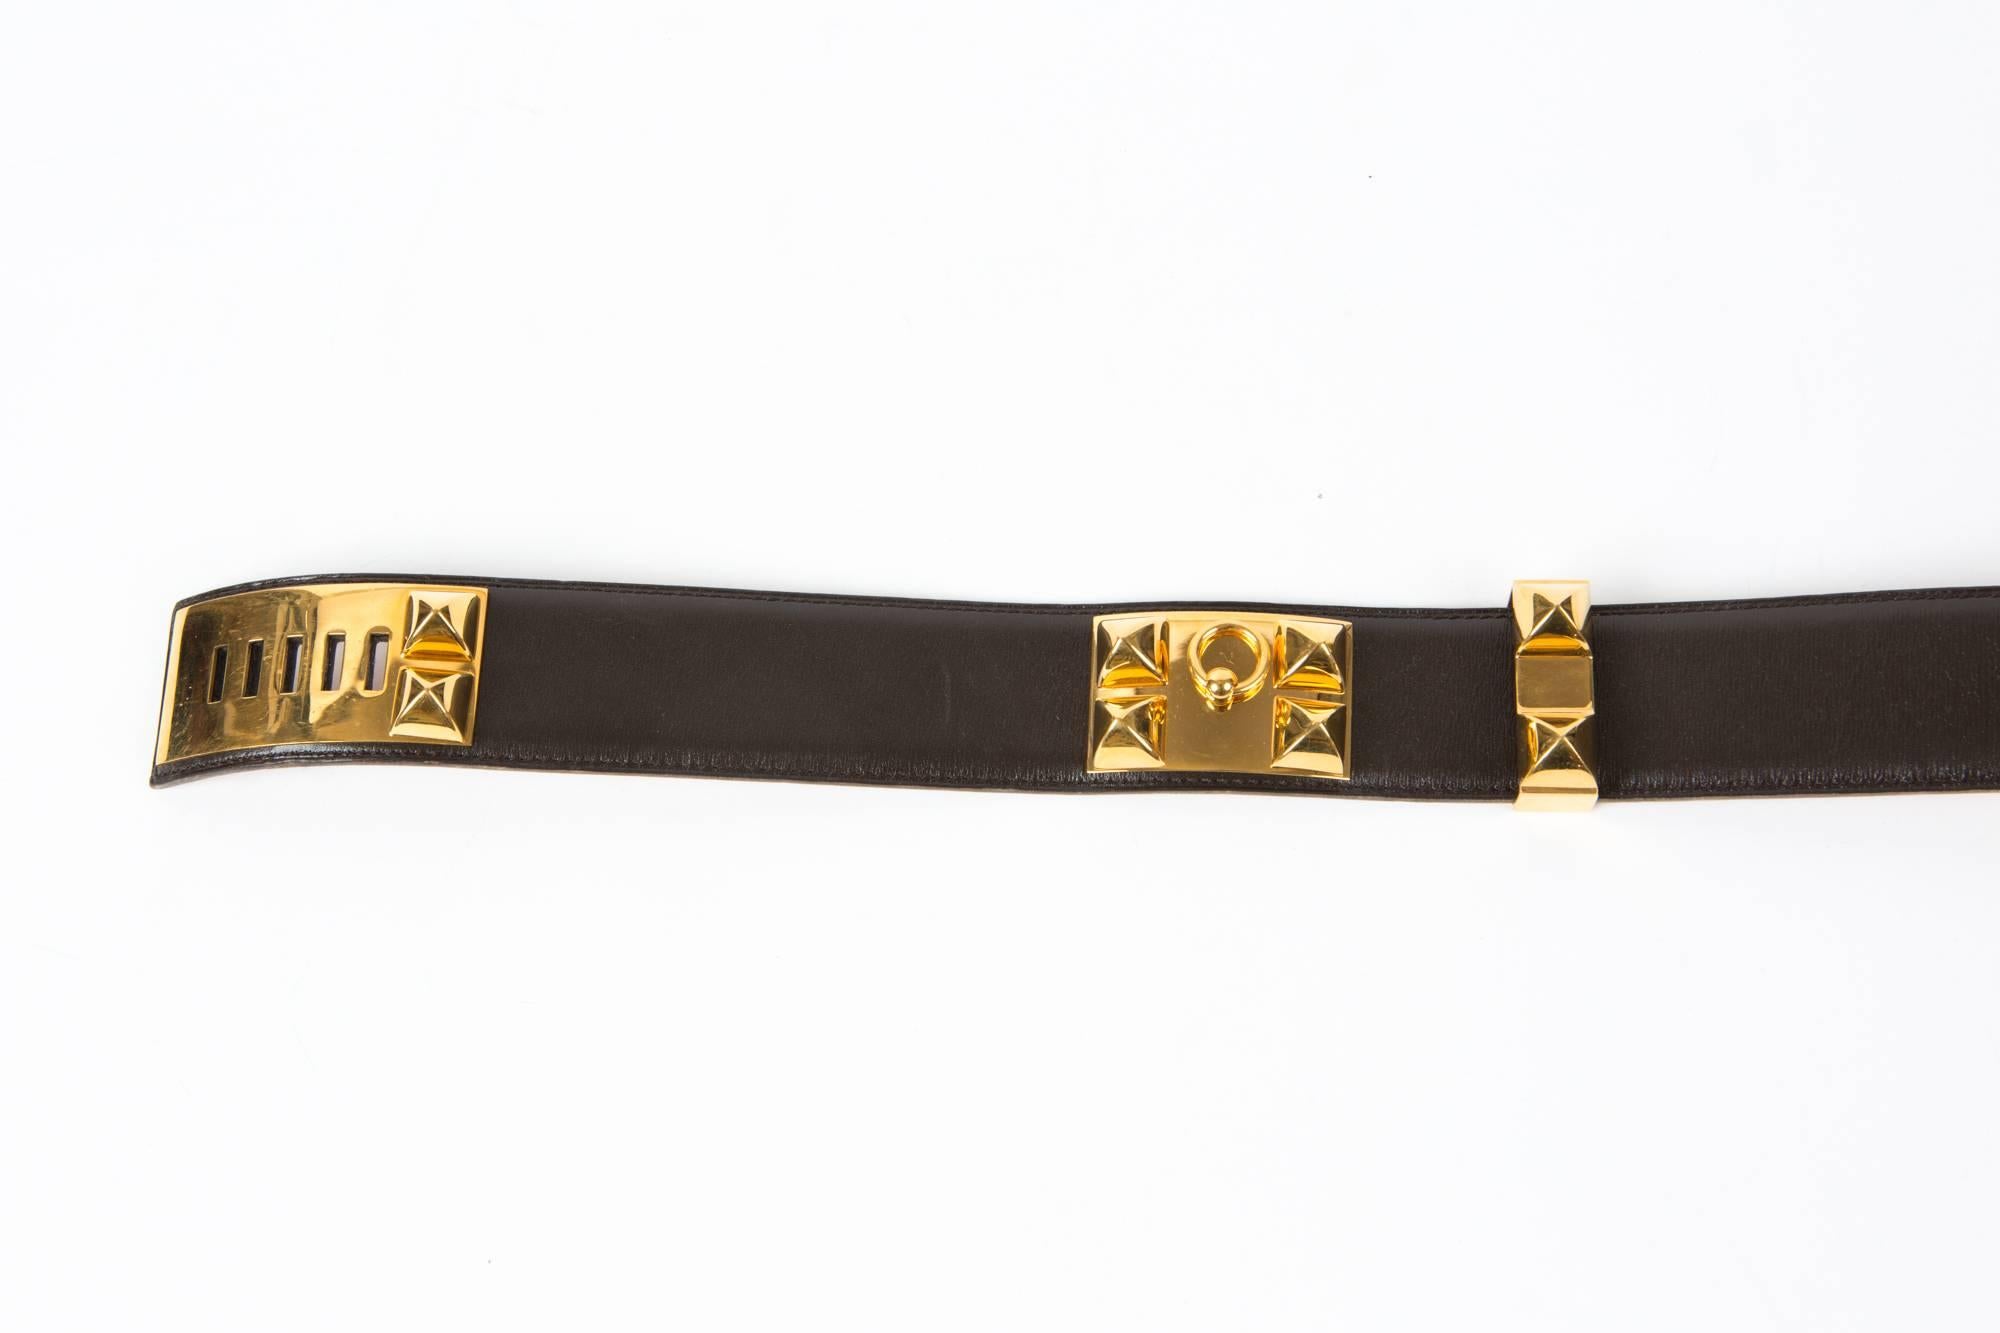 Dark chocolate Hermes Medor « Collier De Chien » box leather belt featuring gold plated hardware details, the interior is in camel leather with Hermes Paris stamp. Z in a round.  In excellent vintage condition. 
 Made in France Size 80
We